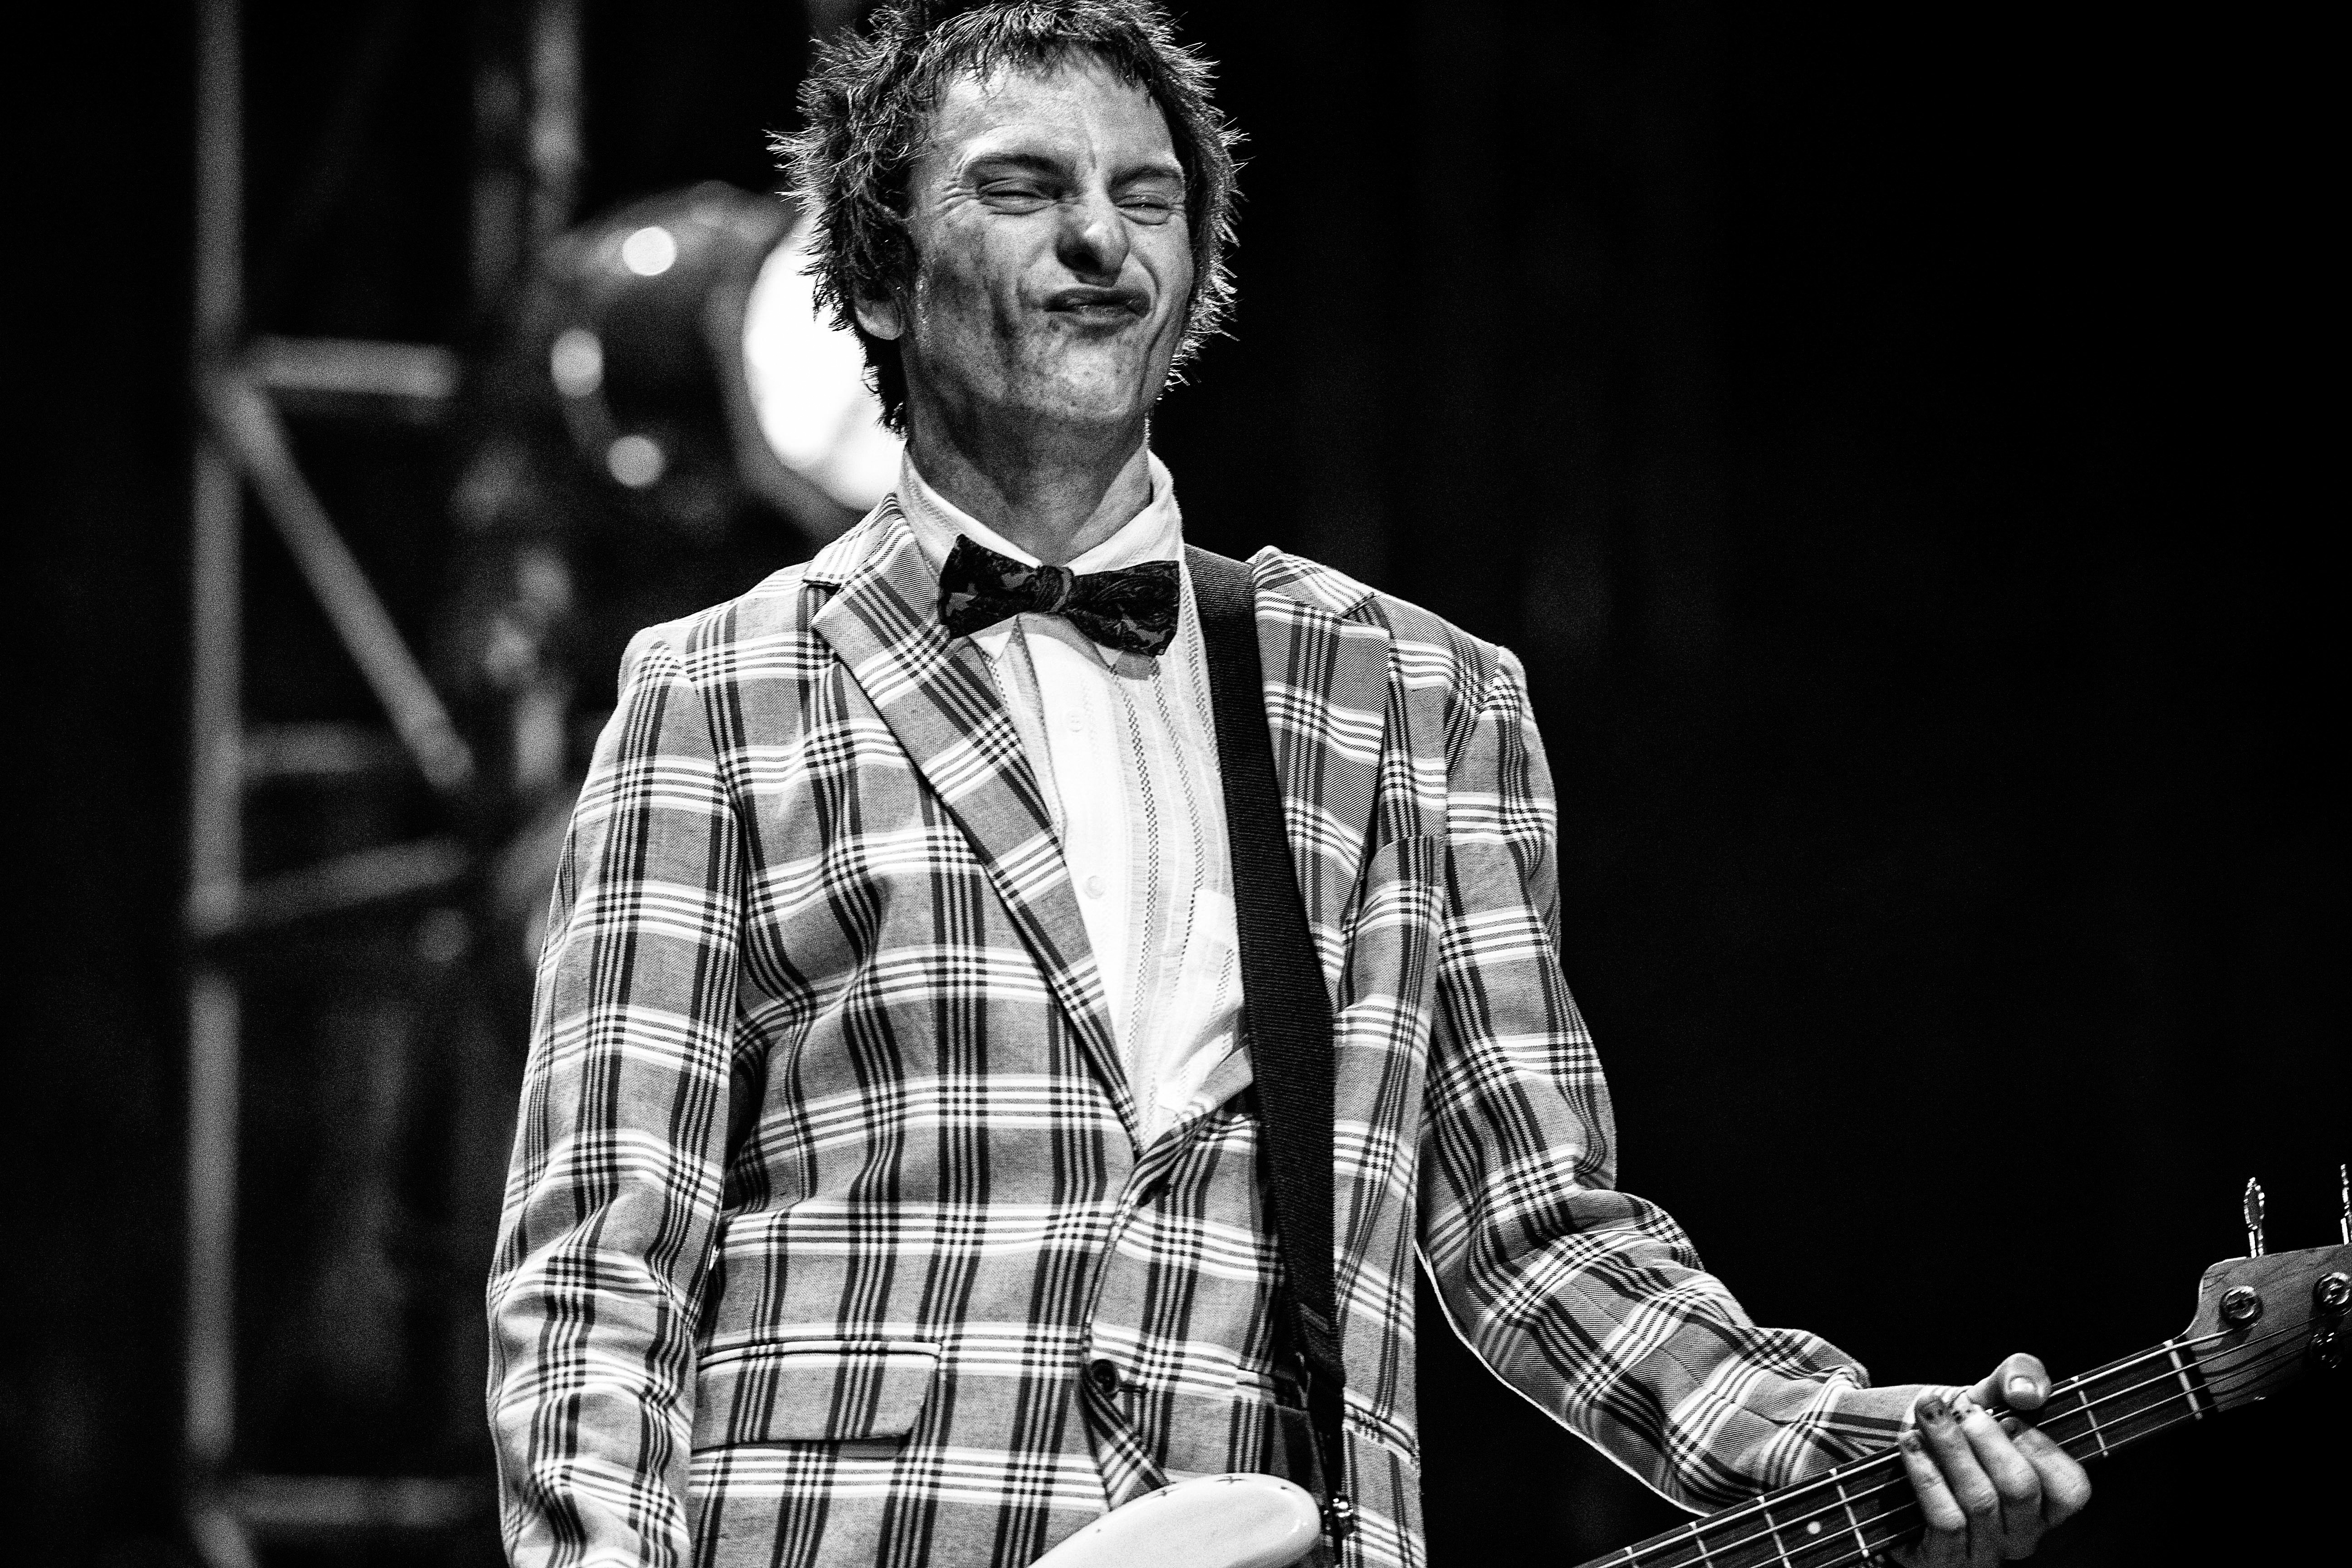 Tommy Stinson performs with The Replacements at Coachella 2014.